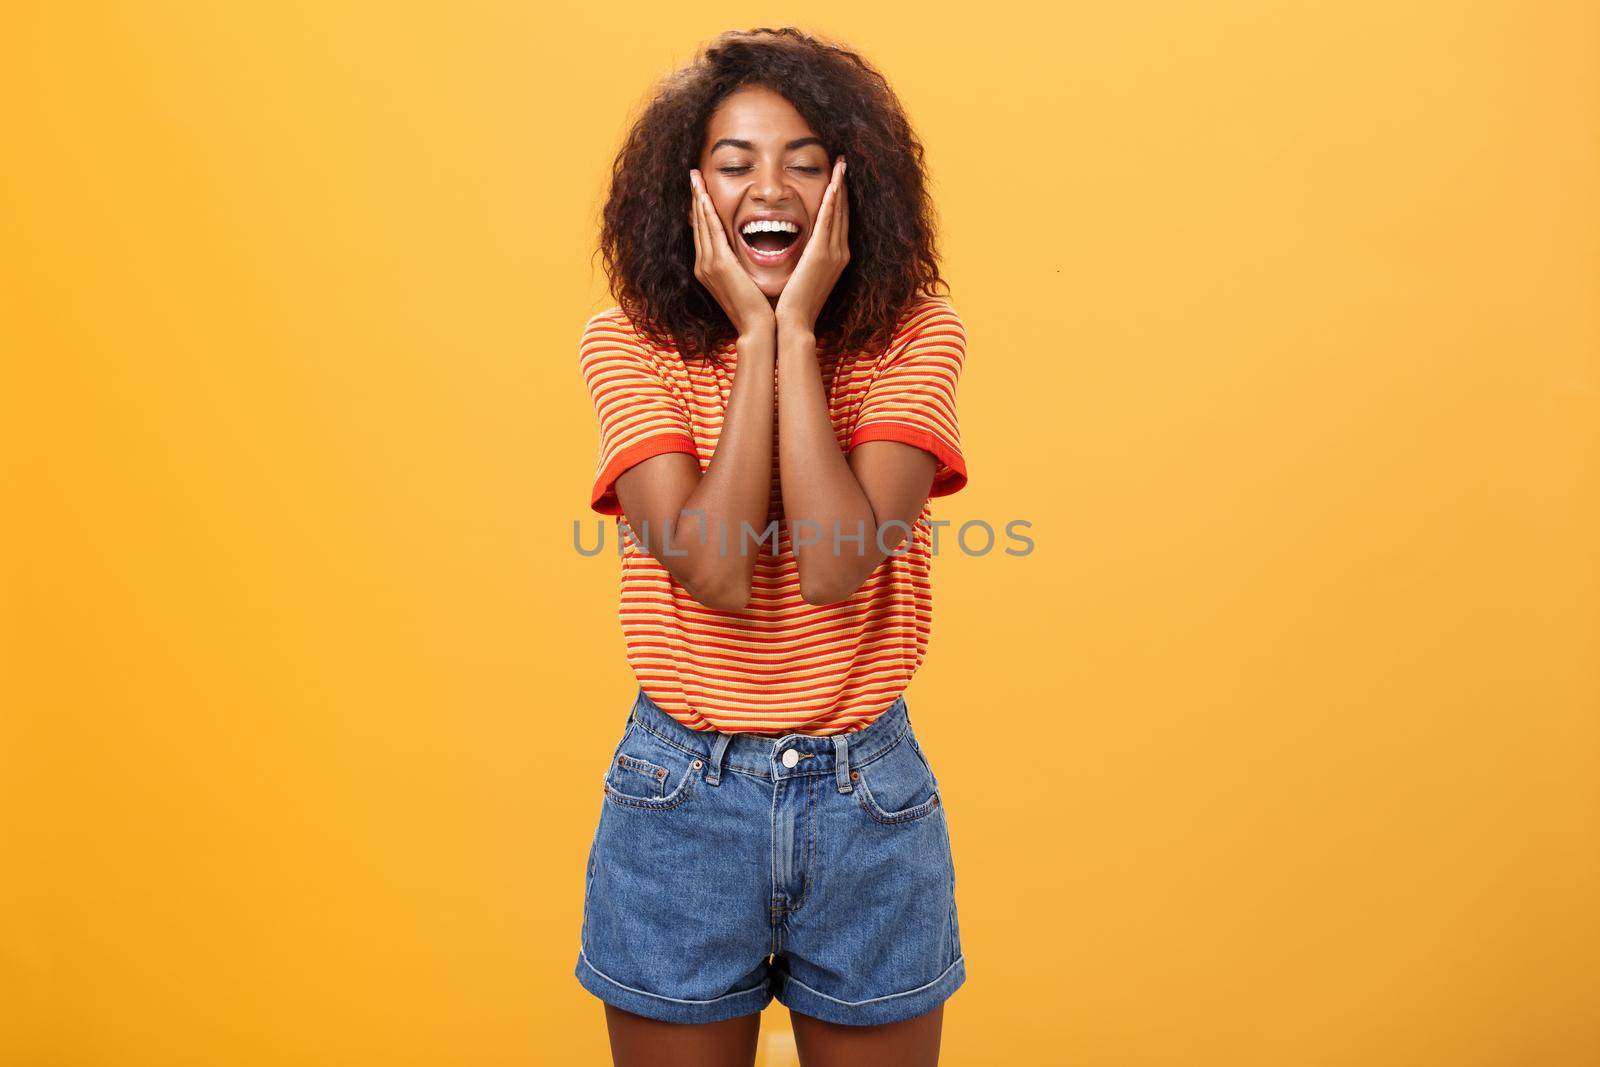 Woman happy and delighted with great result after curing acne with skincare products touching cheeks smiling happily with closed eyes feeling pleased and amused over orange background. Copy space